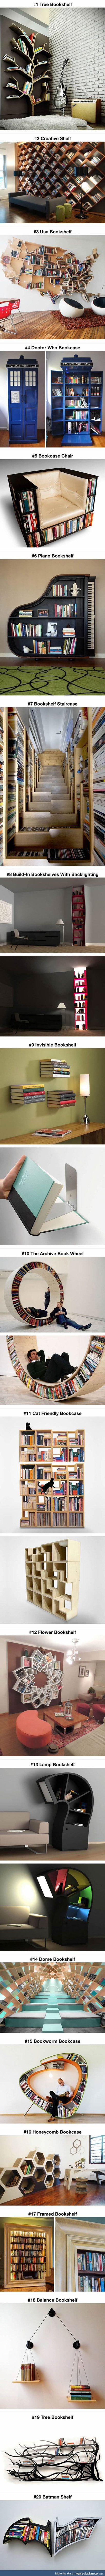 Probably the most creative bookshelves ever